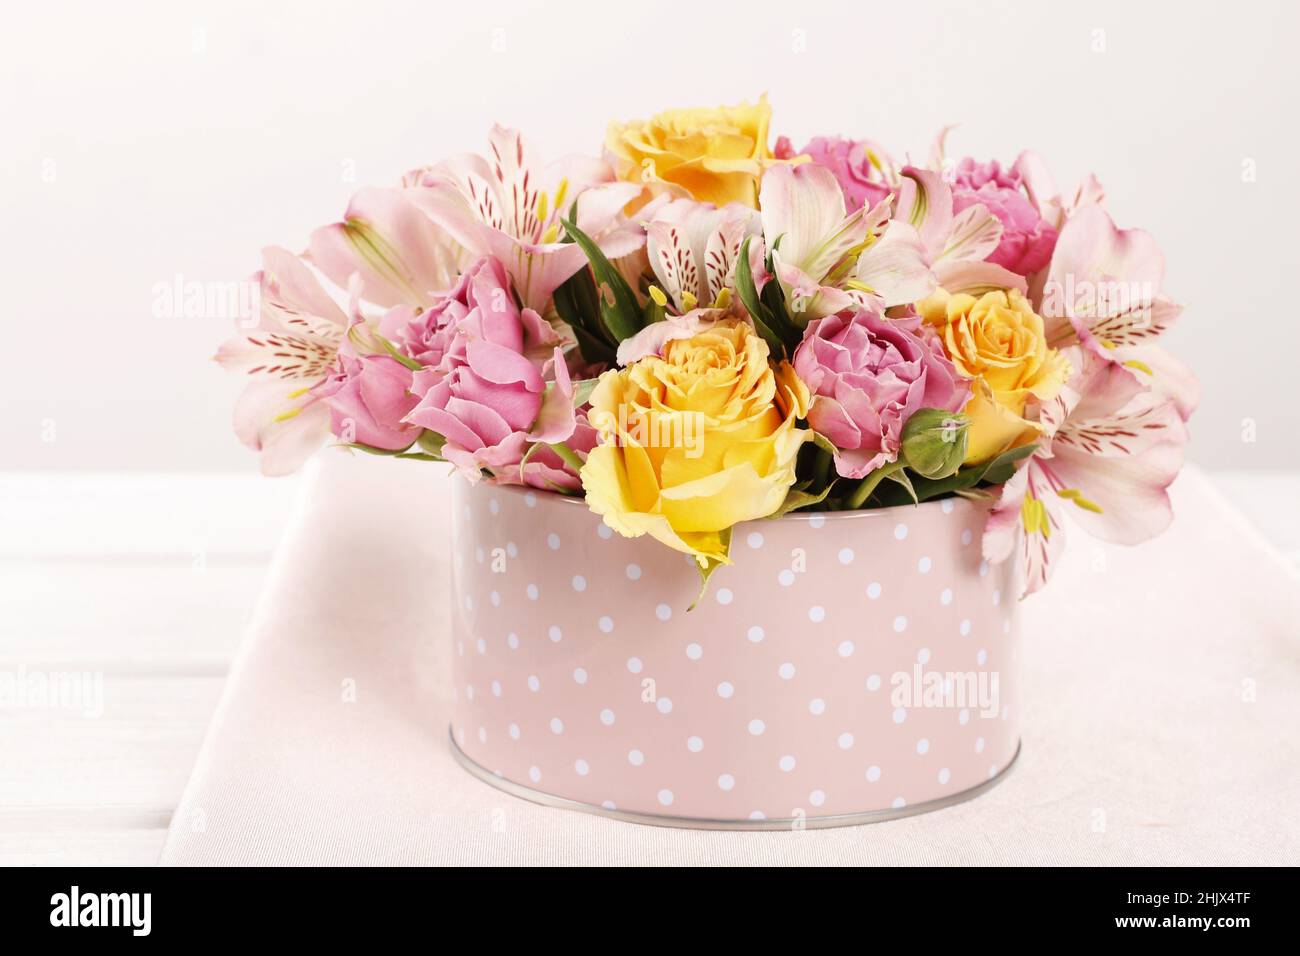 Florist at work: woman shows how to make floral arrangement with roses and other flowers inside a pink dotted can. Step by step, tutorial. Stock Photo